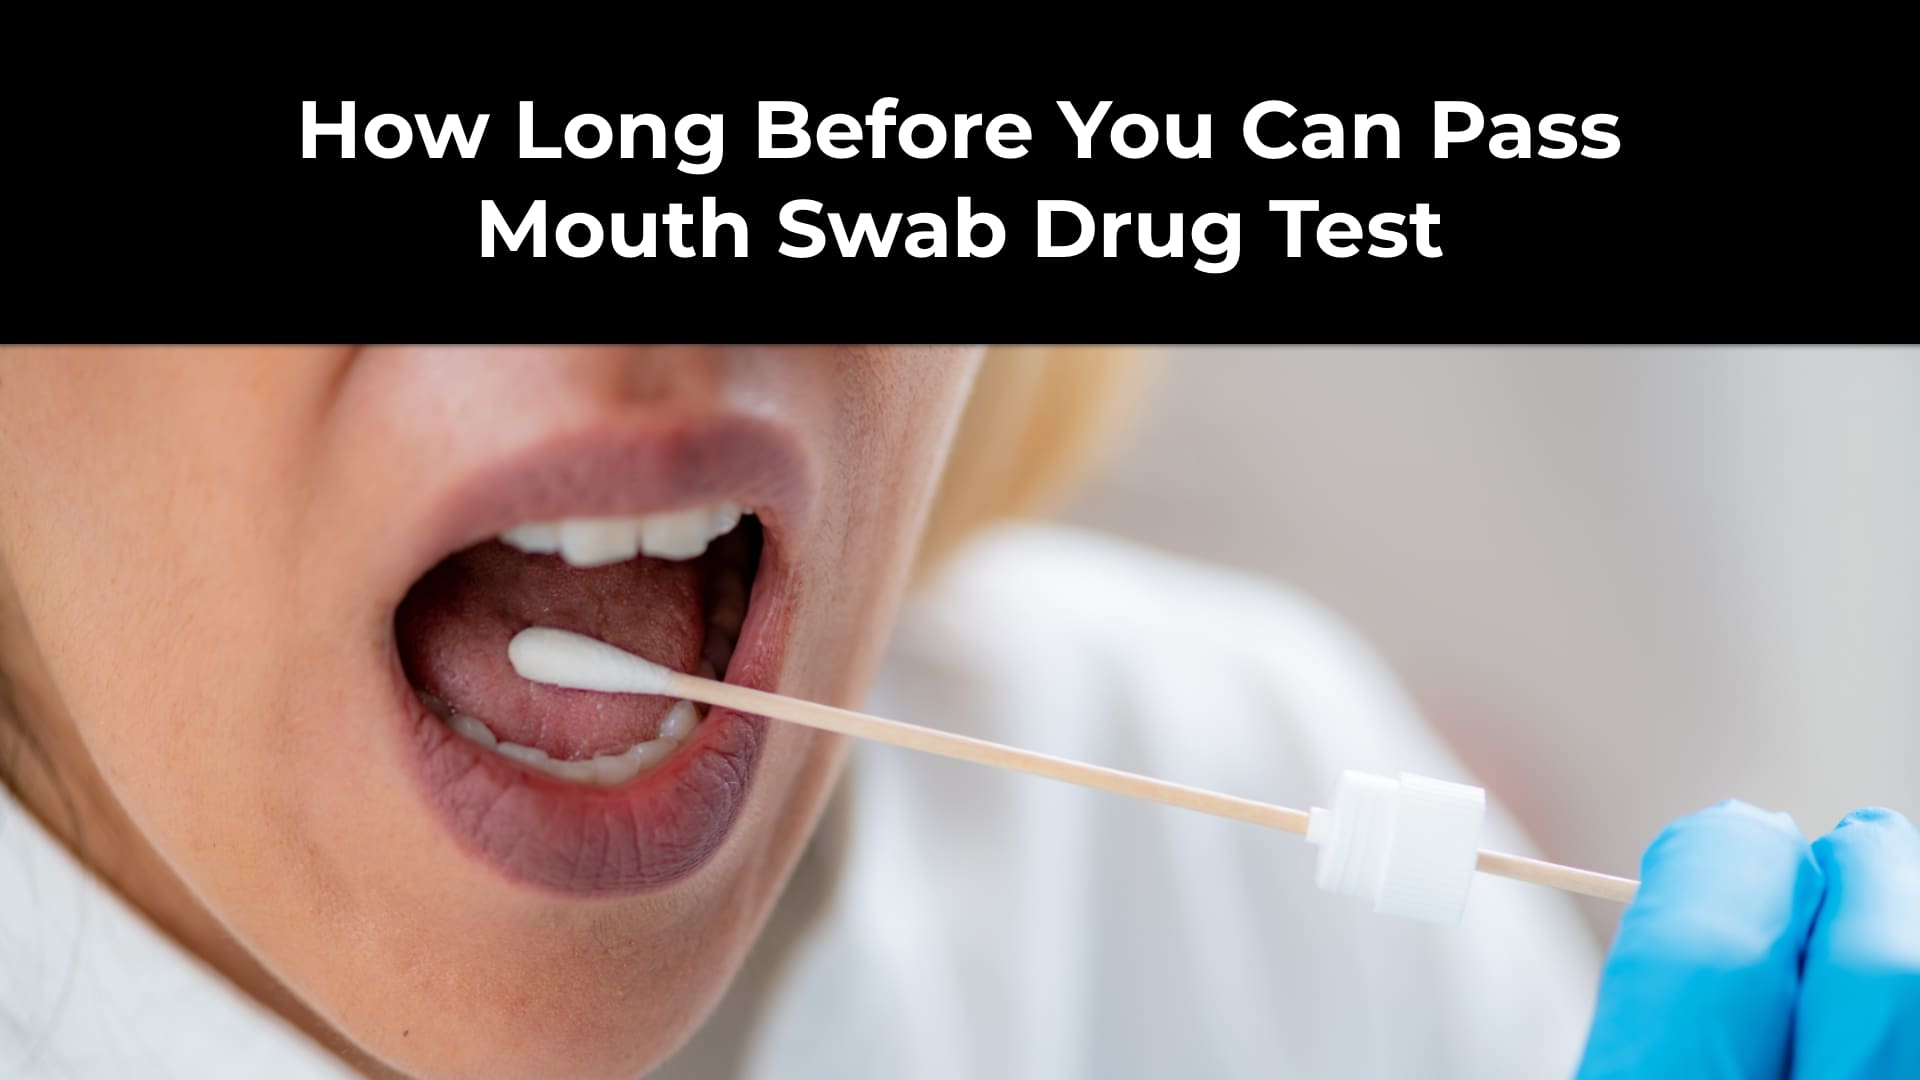 How Long Before You Can Pass Mouth Swab Drug Test